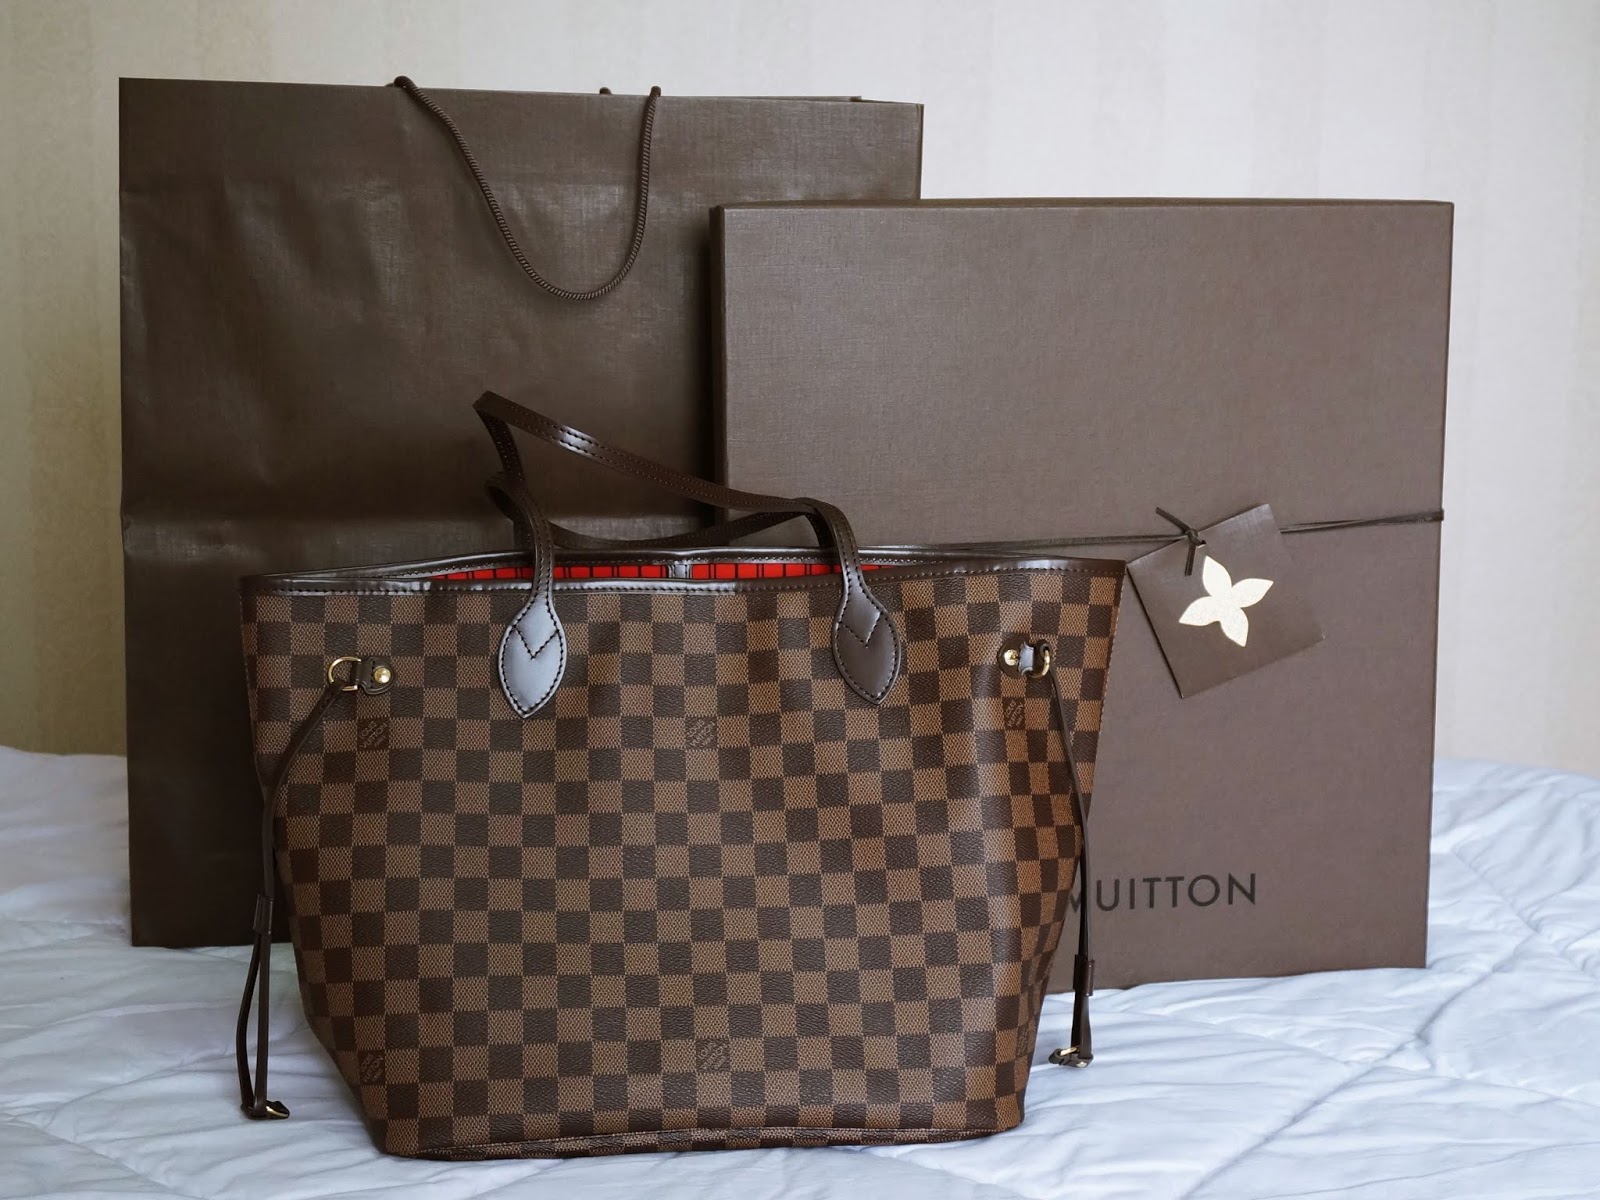 My Shopping Diary: Review : Louis Vuitton Neverfull MM in Damier Ebene